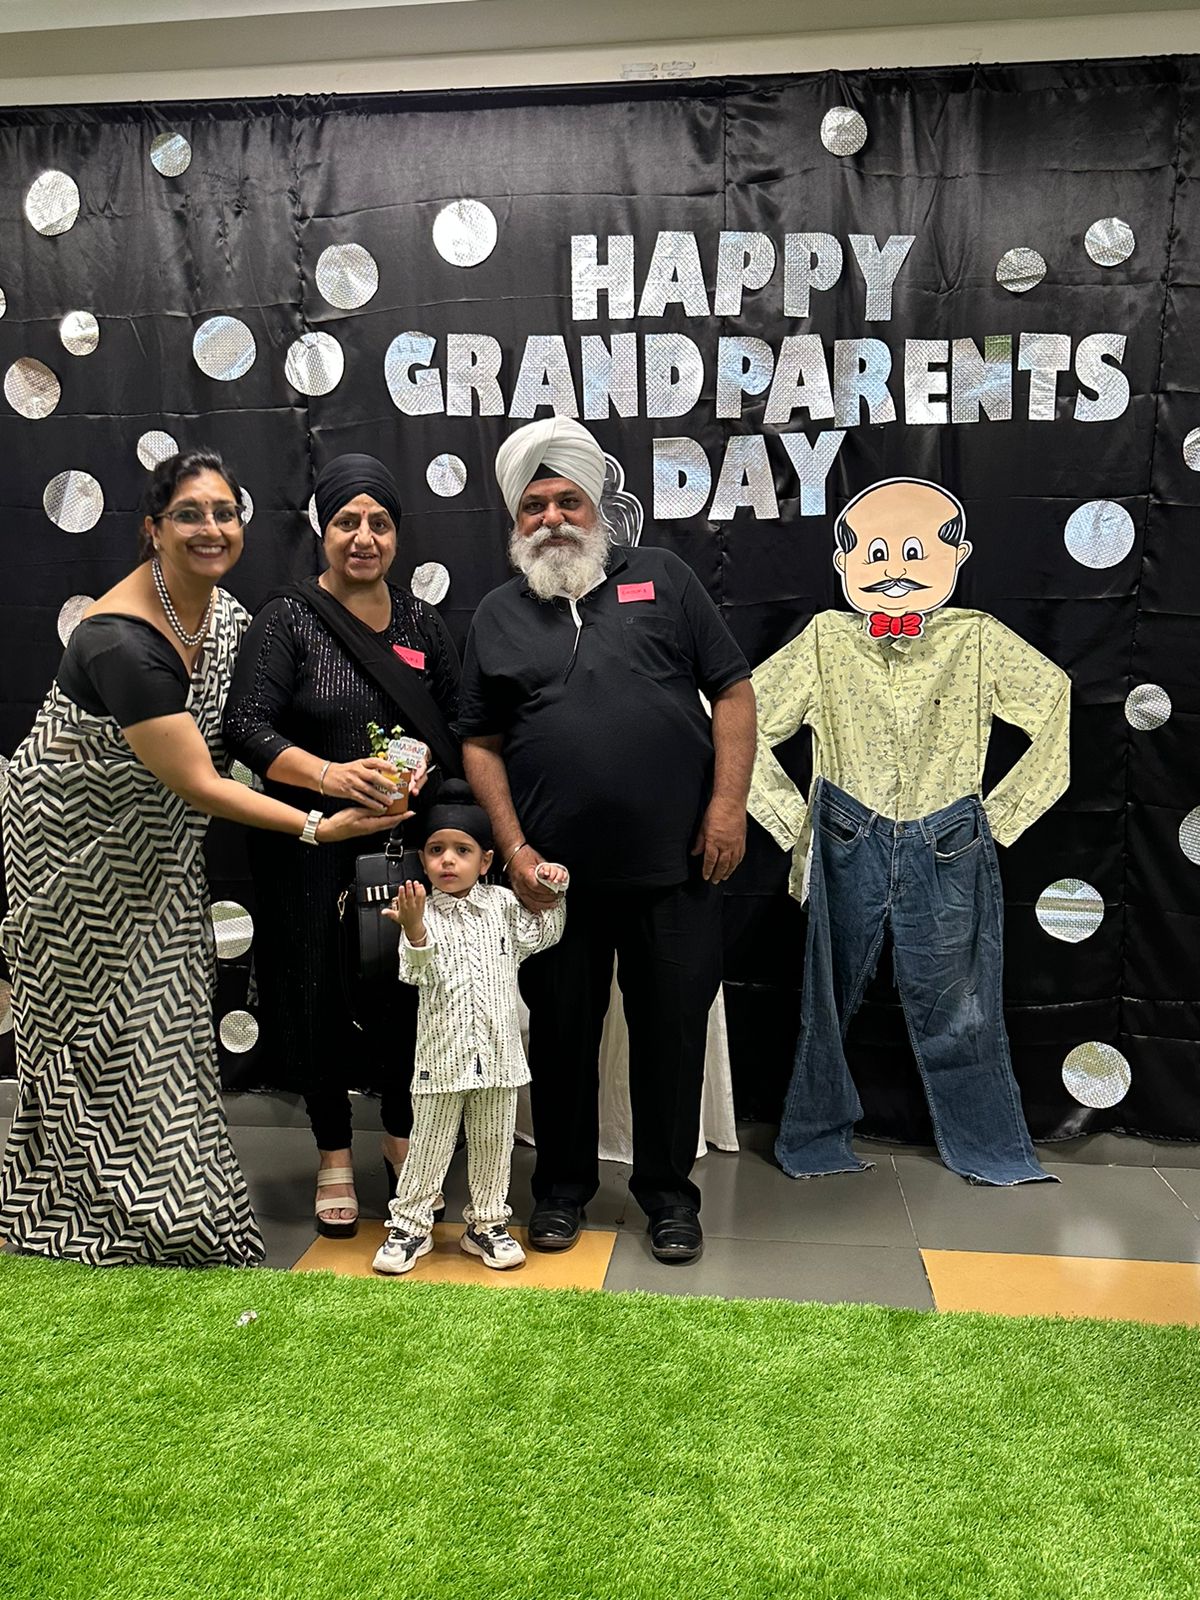 Grandparents - Our Happiness